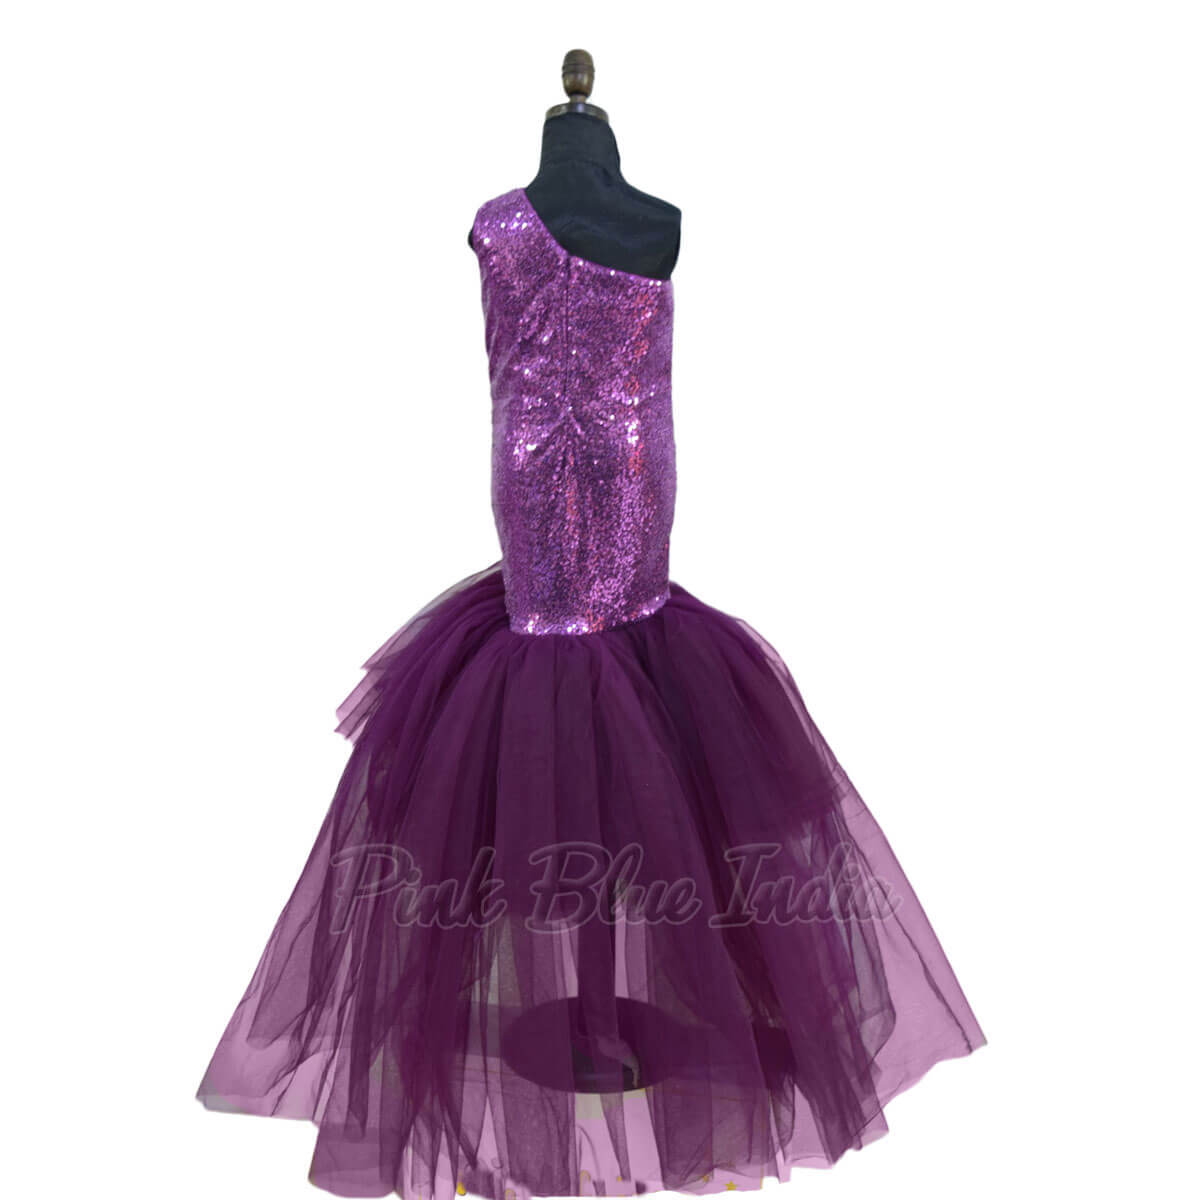 Buy DosTutu 2 Colors Mermaid Dress for Girls with Headband Birthday Tutu  Outfits Christmas Party Gifts (1-2T, Purple) Online at Low Prices in India  - Amazon.in